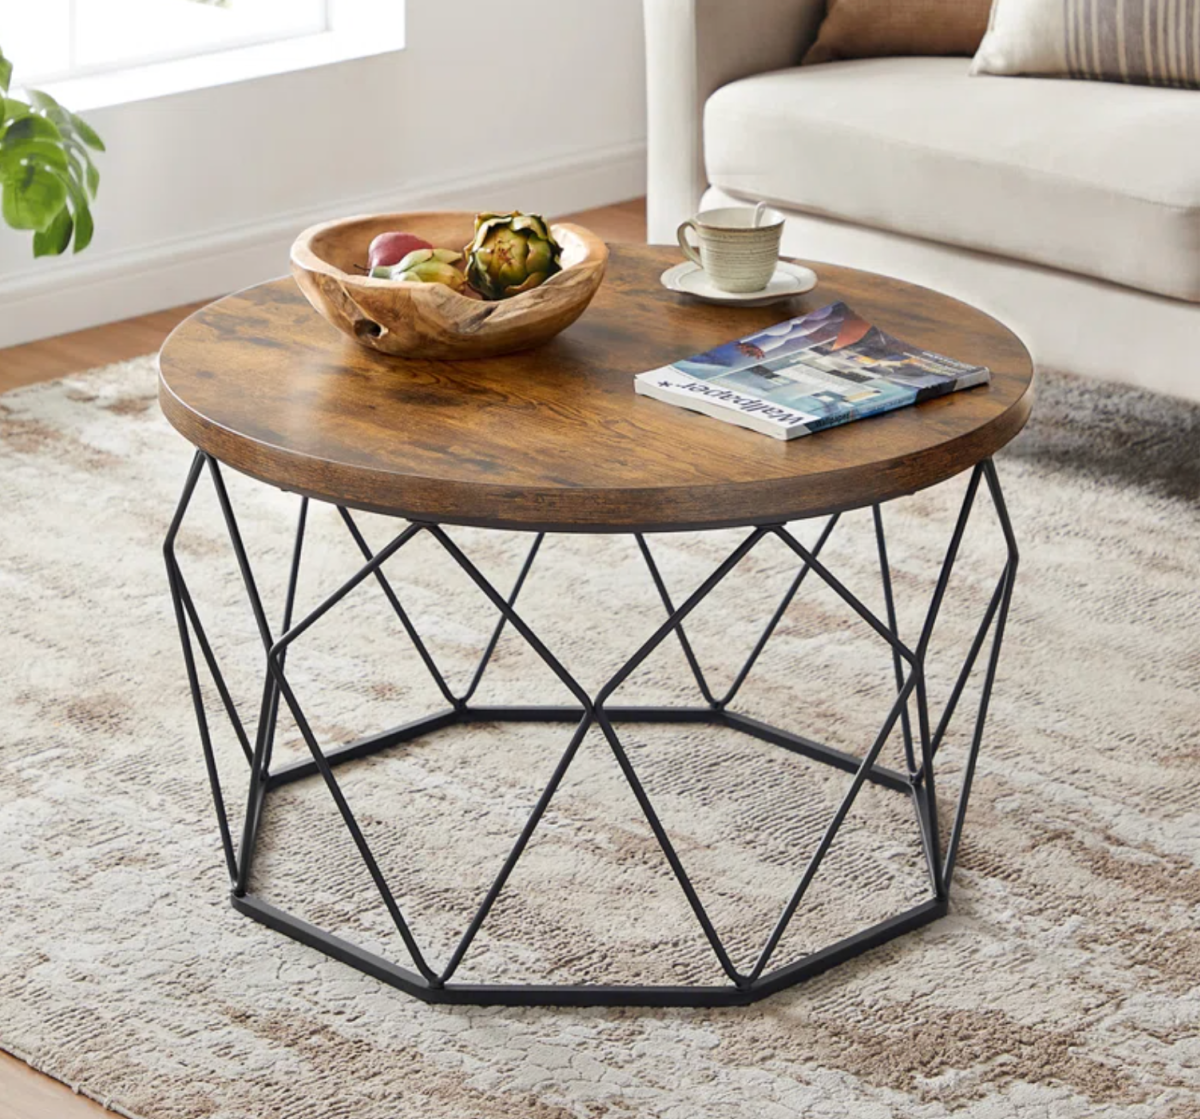 a geometric coffee table from Wayfair that was on sale during the Wayfair Black Friday event